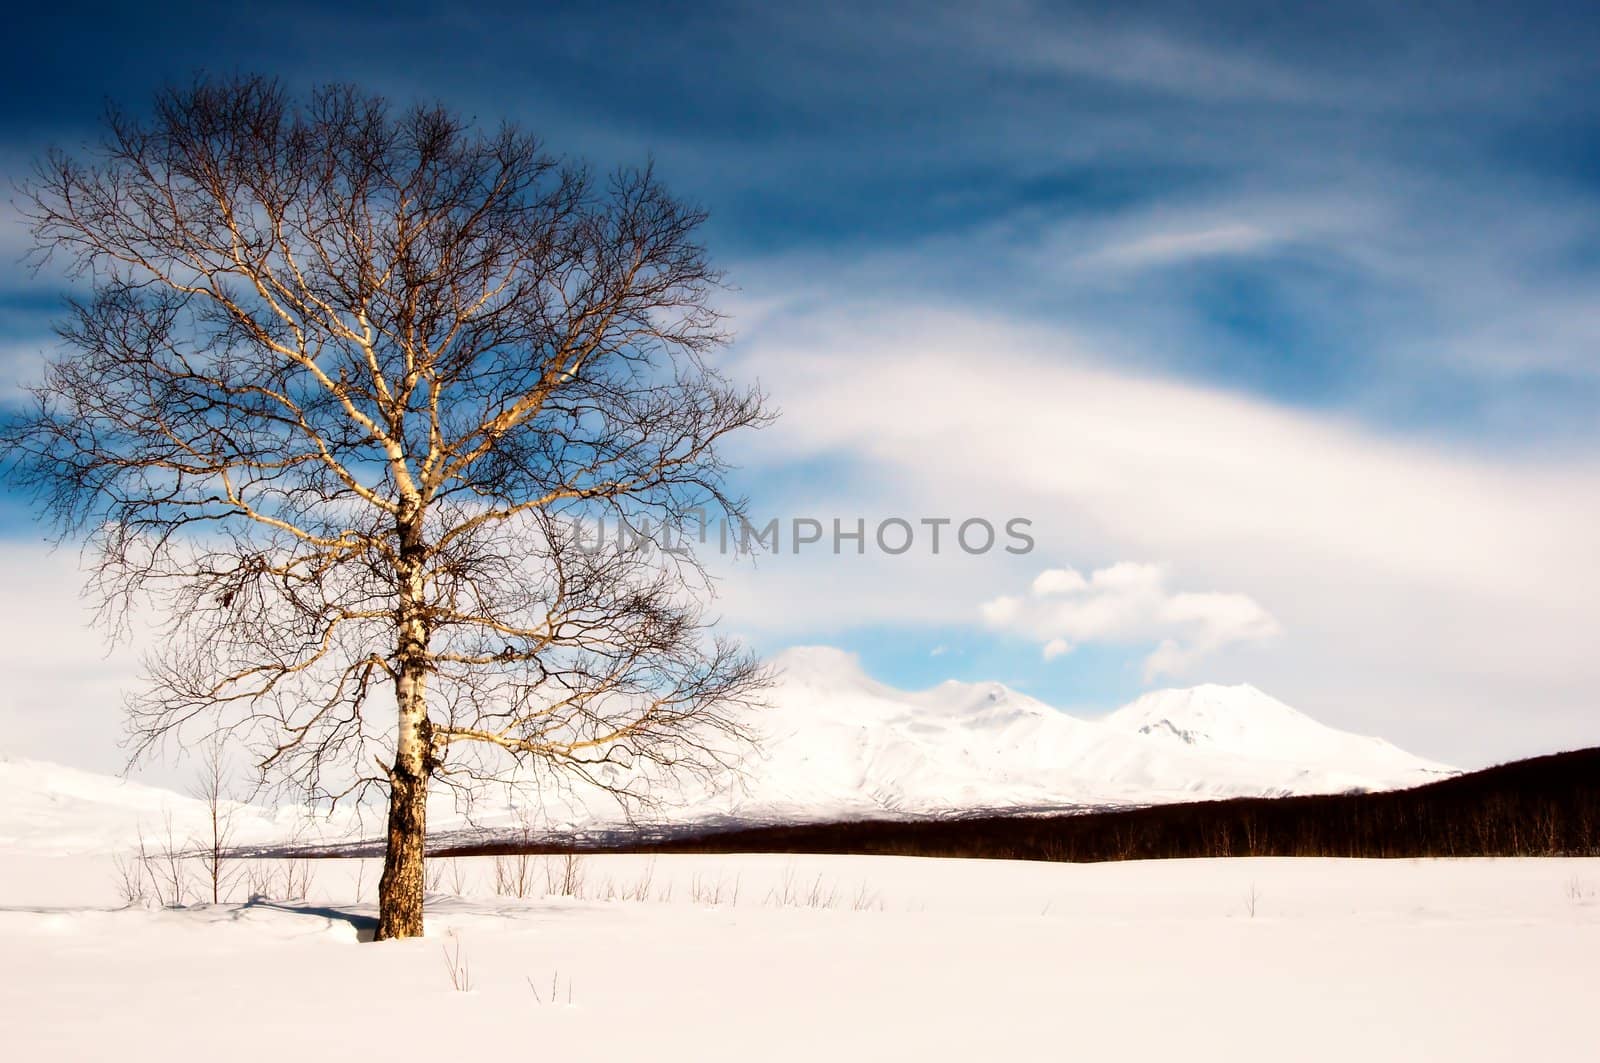 Magnificent winter landscape - a tree against a volcano